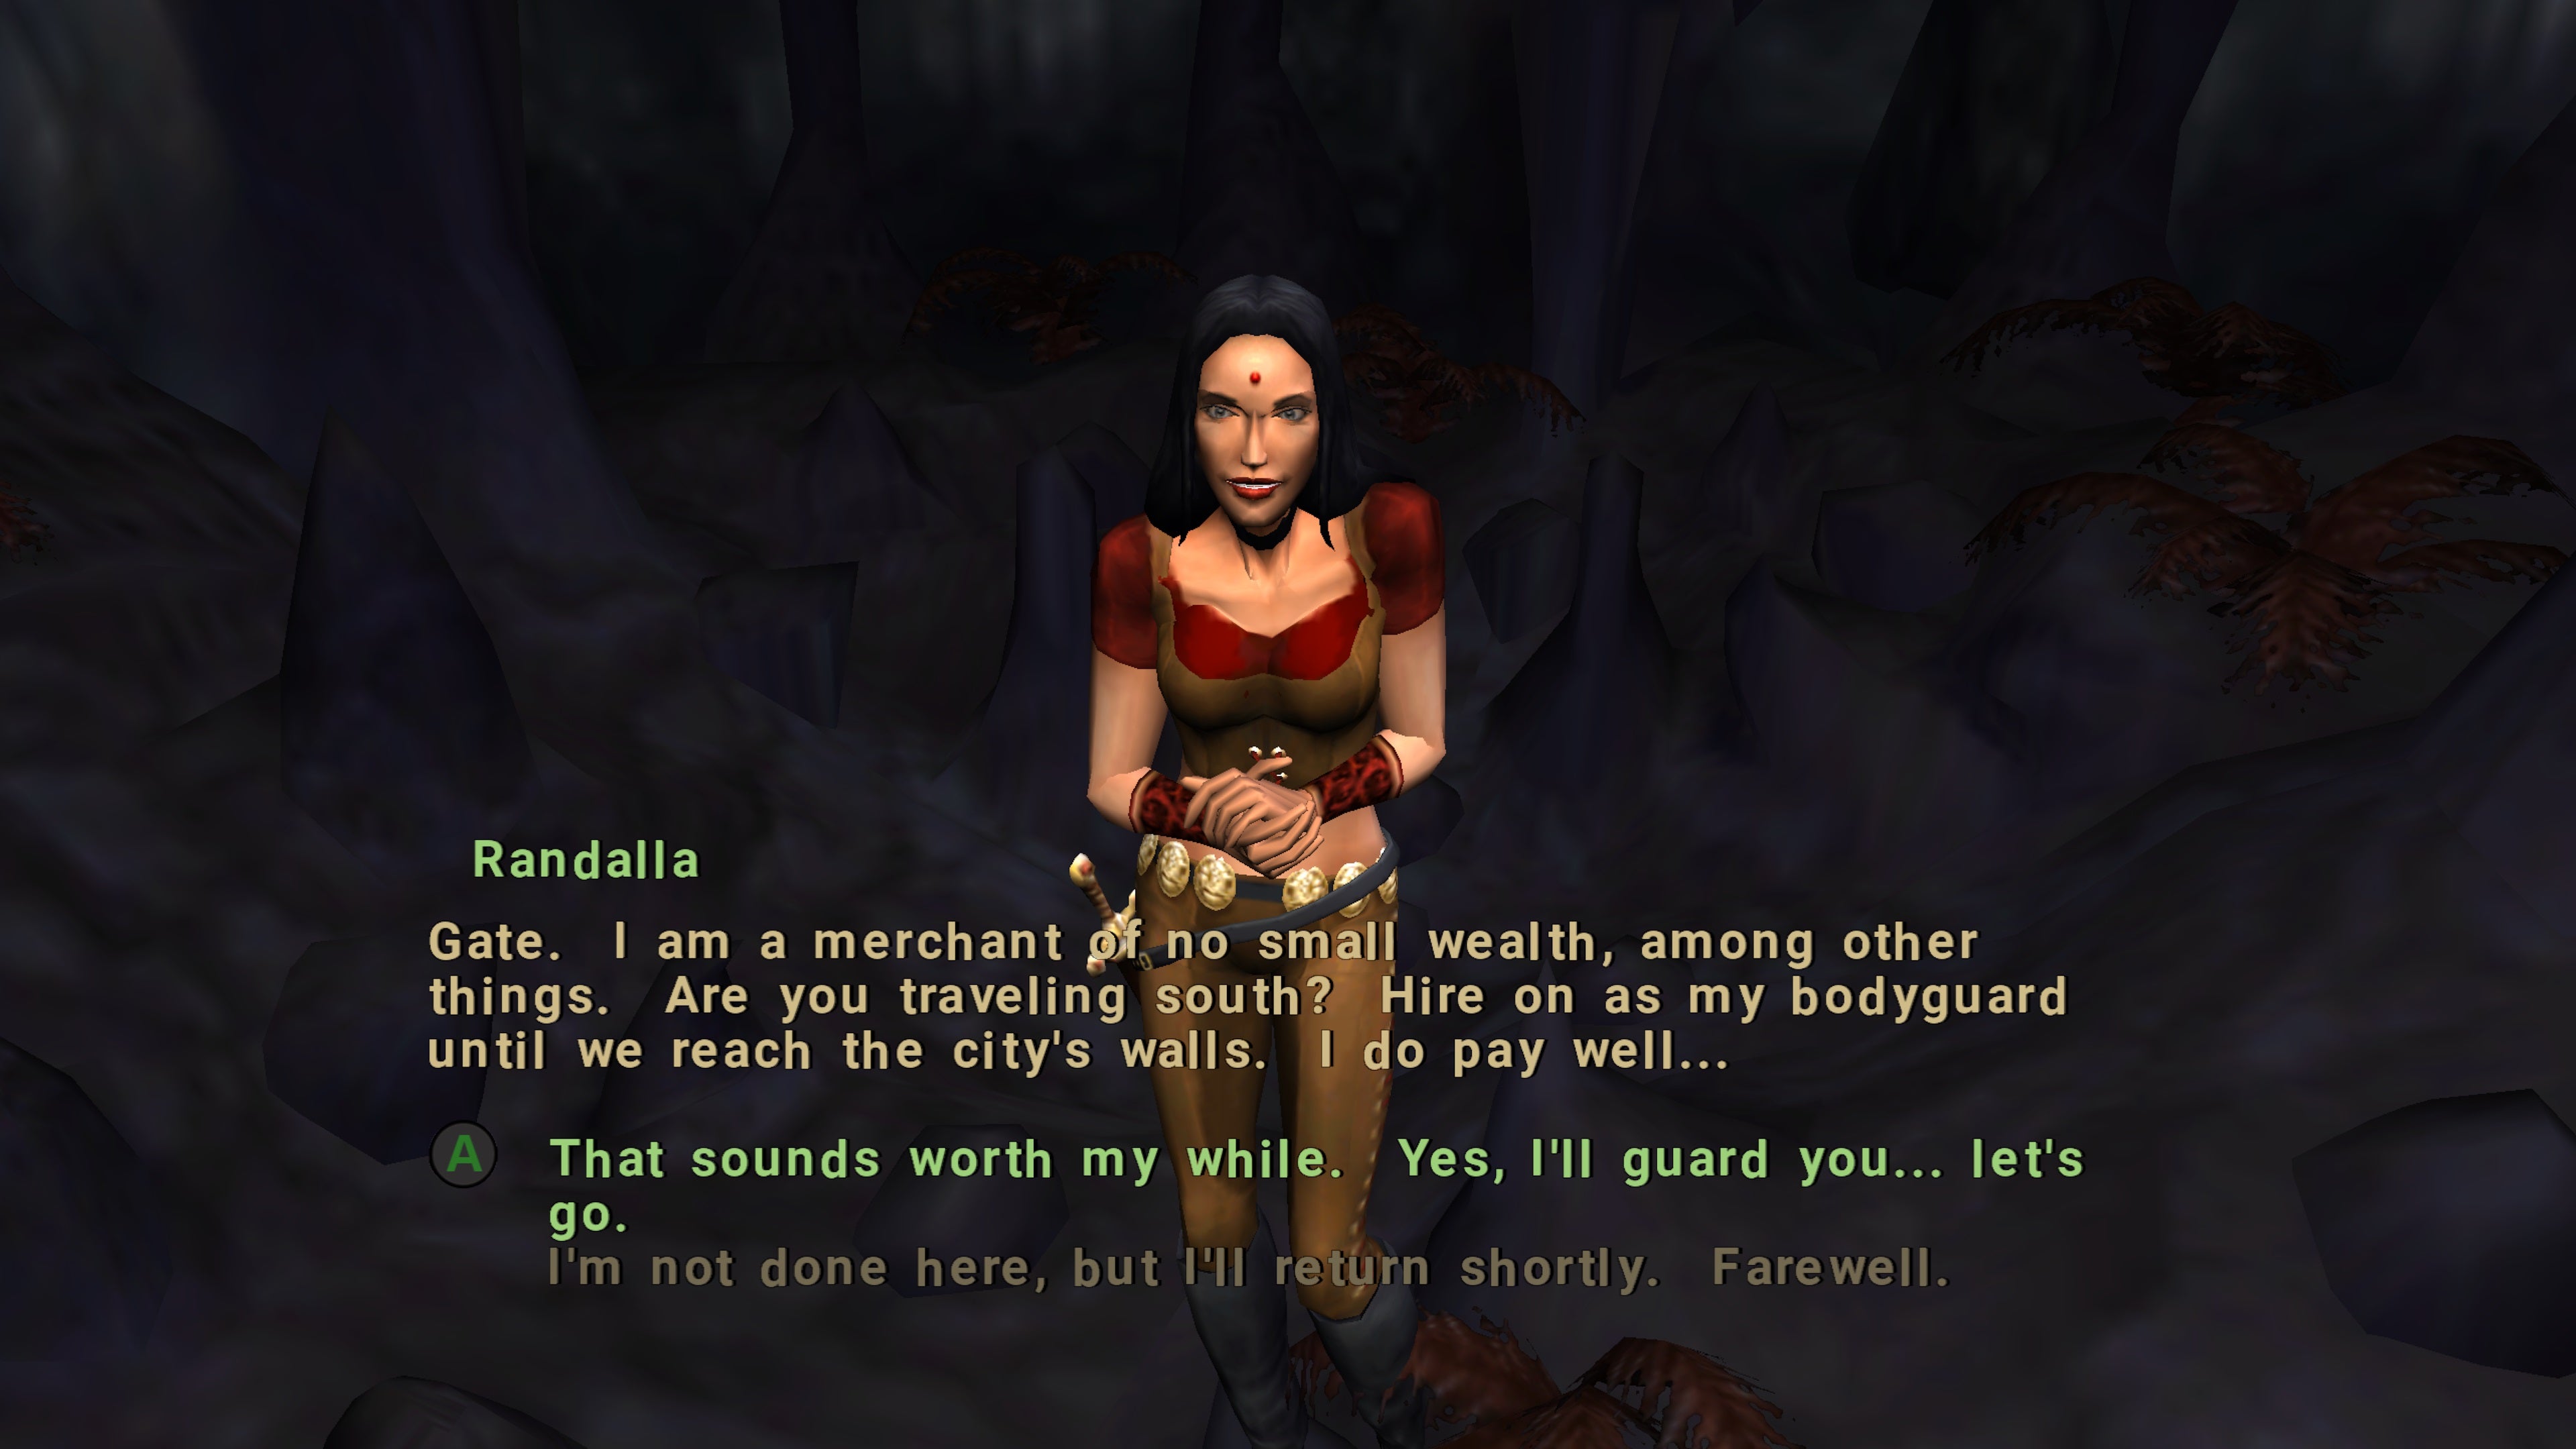 A merchant lady in a red top asks for our help escorting her out of a cave.